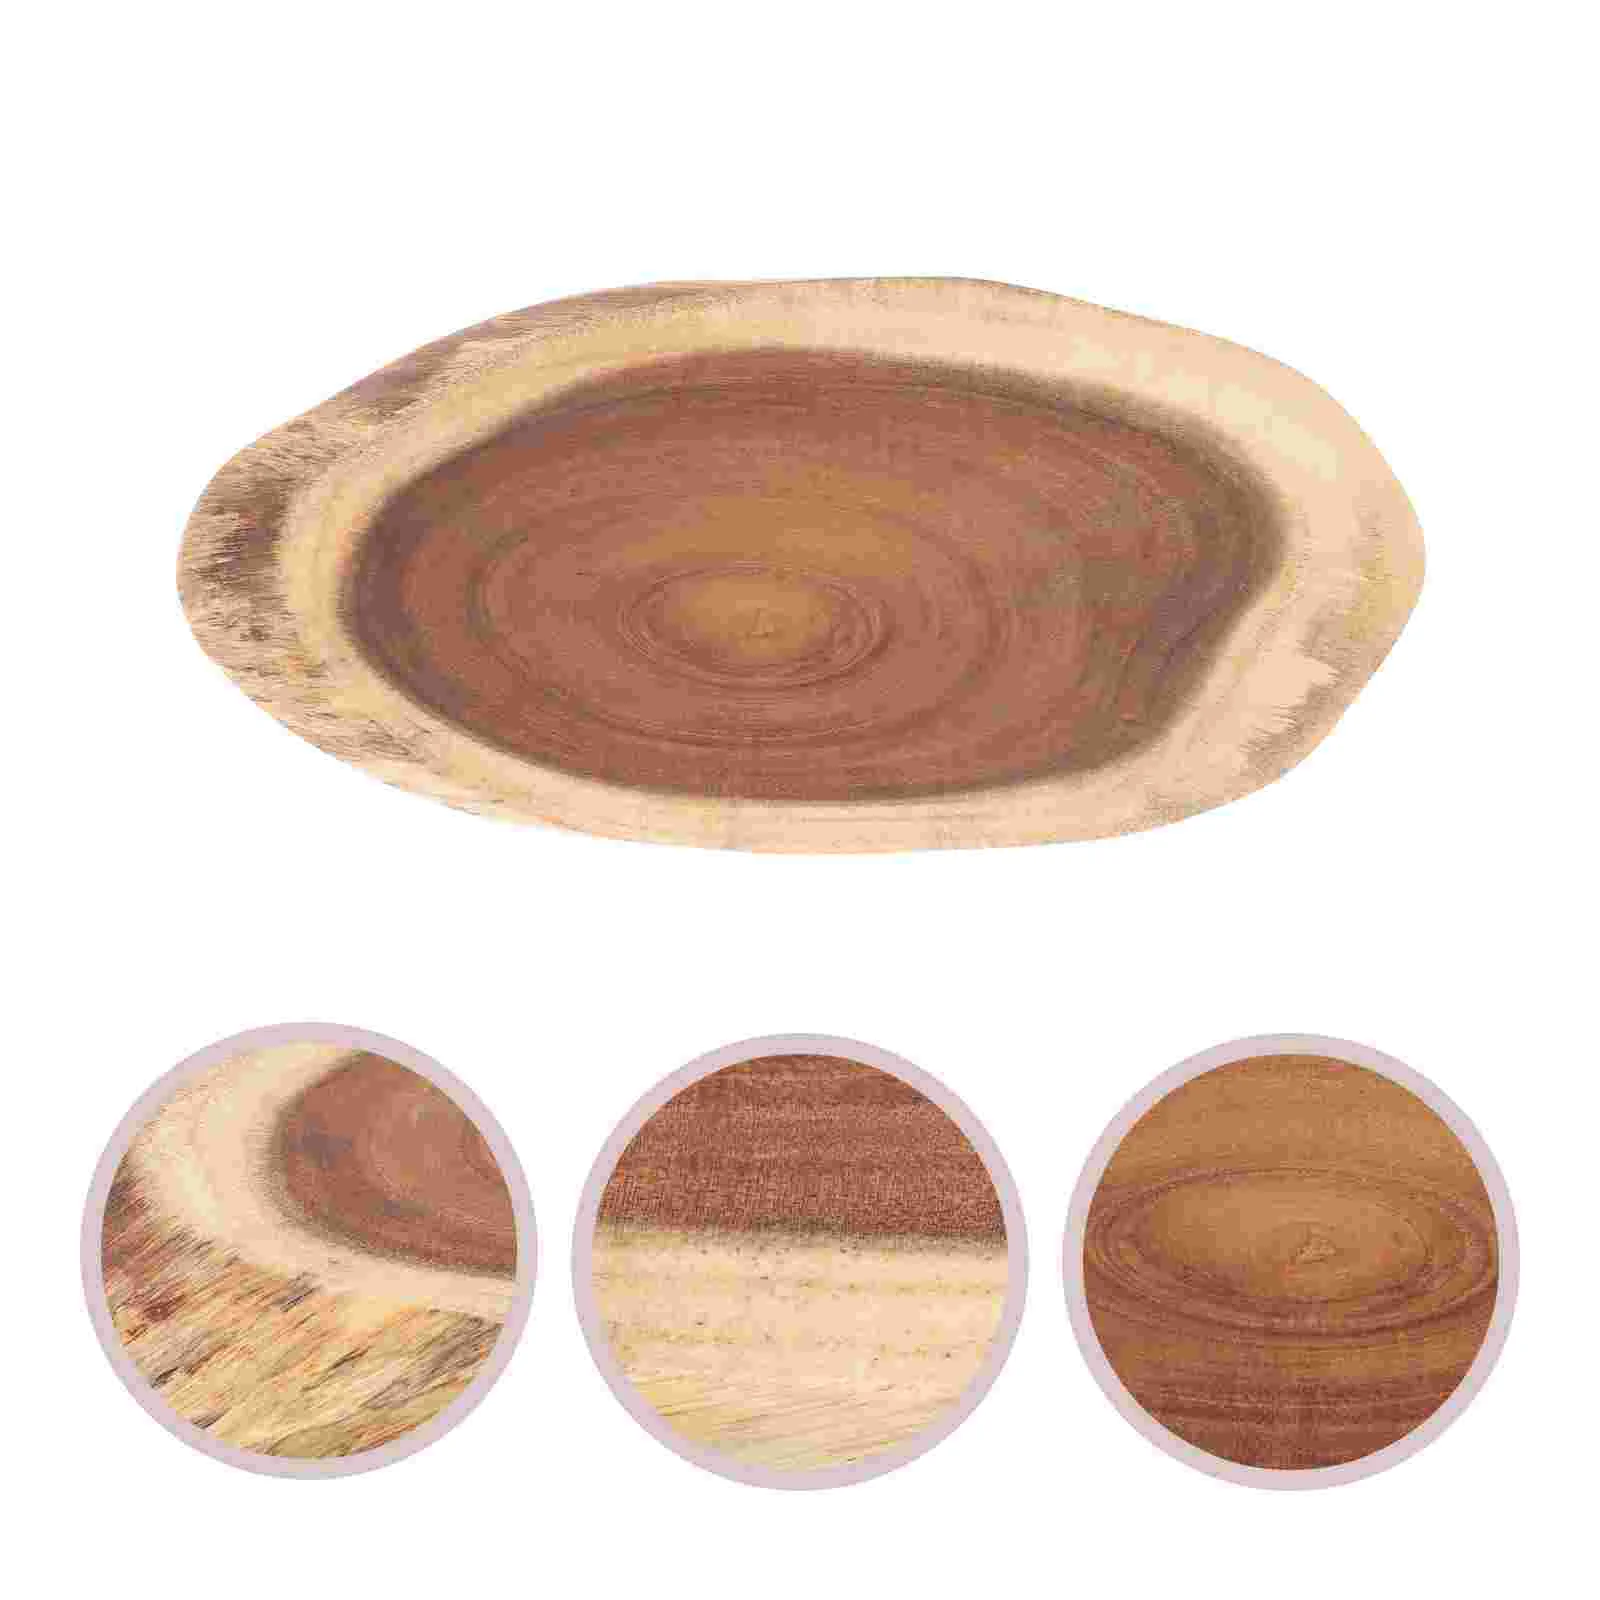 Serving Tray Round Cheese Board Wooden Bread Cutting Catering Food Plates Dresser Meat Cedar Planks Grilling Salmon Log